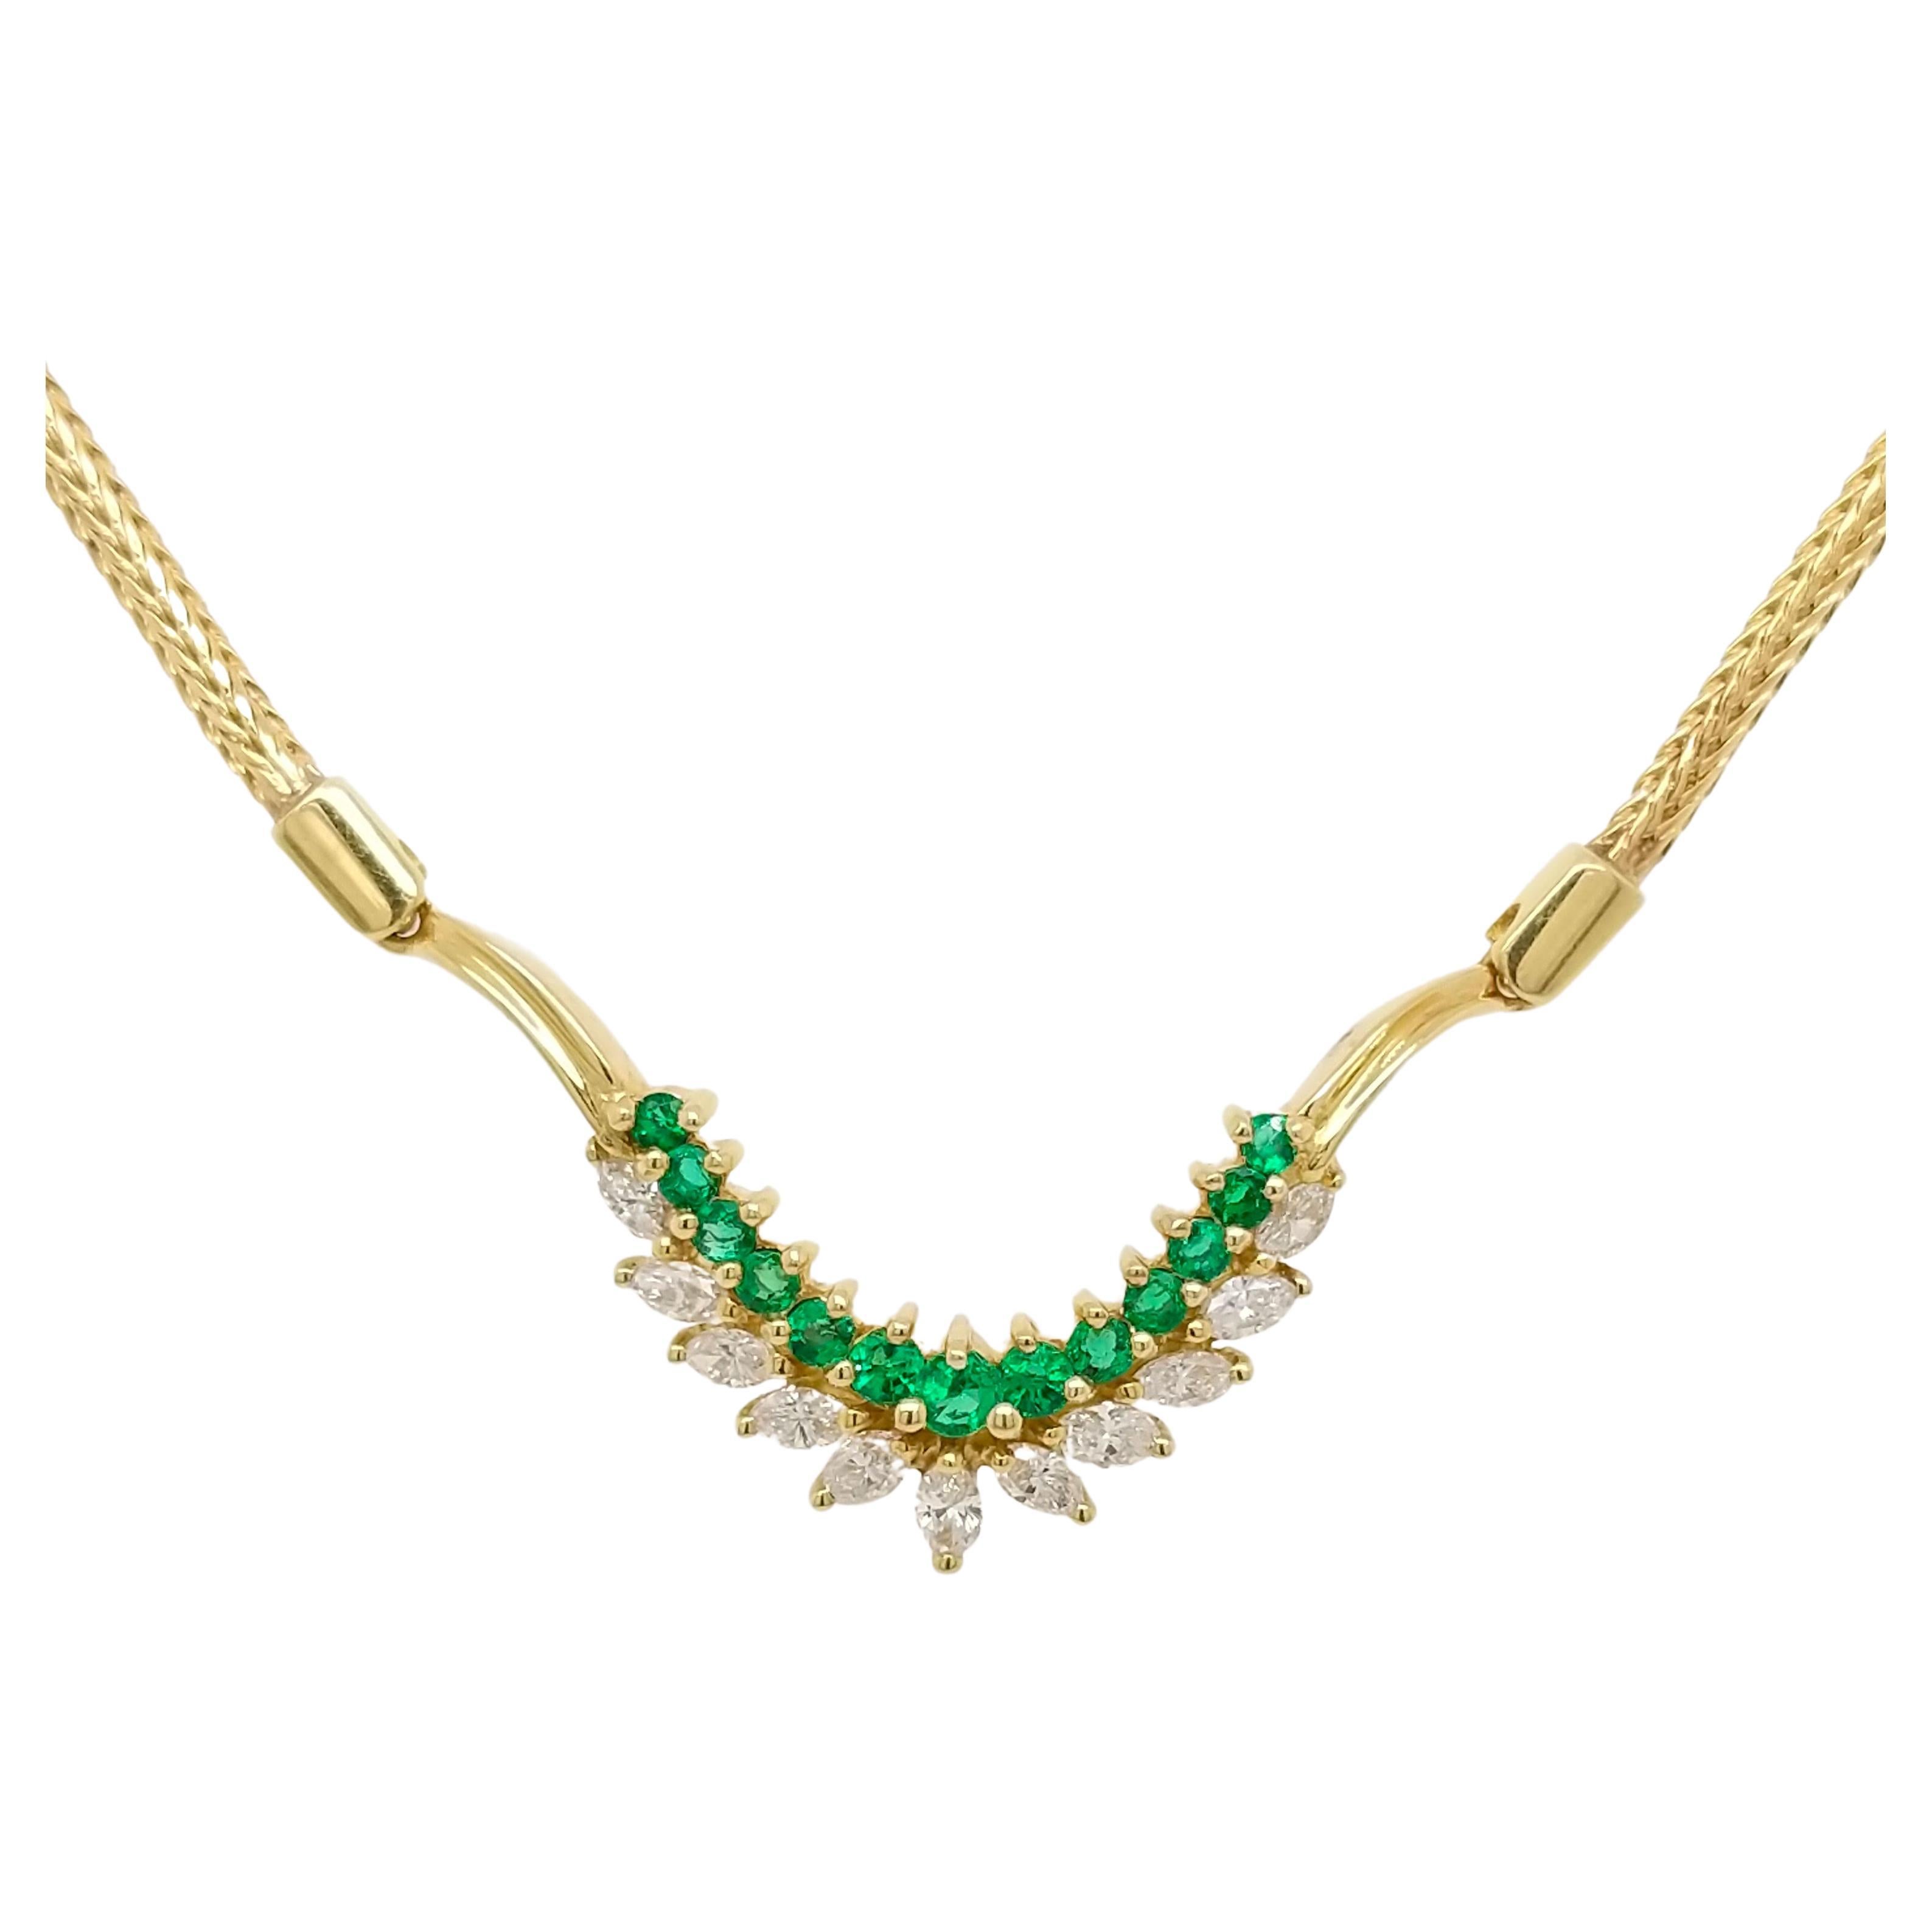 1960s Black, Starr & Frost 18K Yellow Gold Diamond and Emerald Necklace